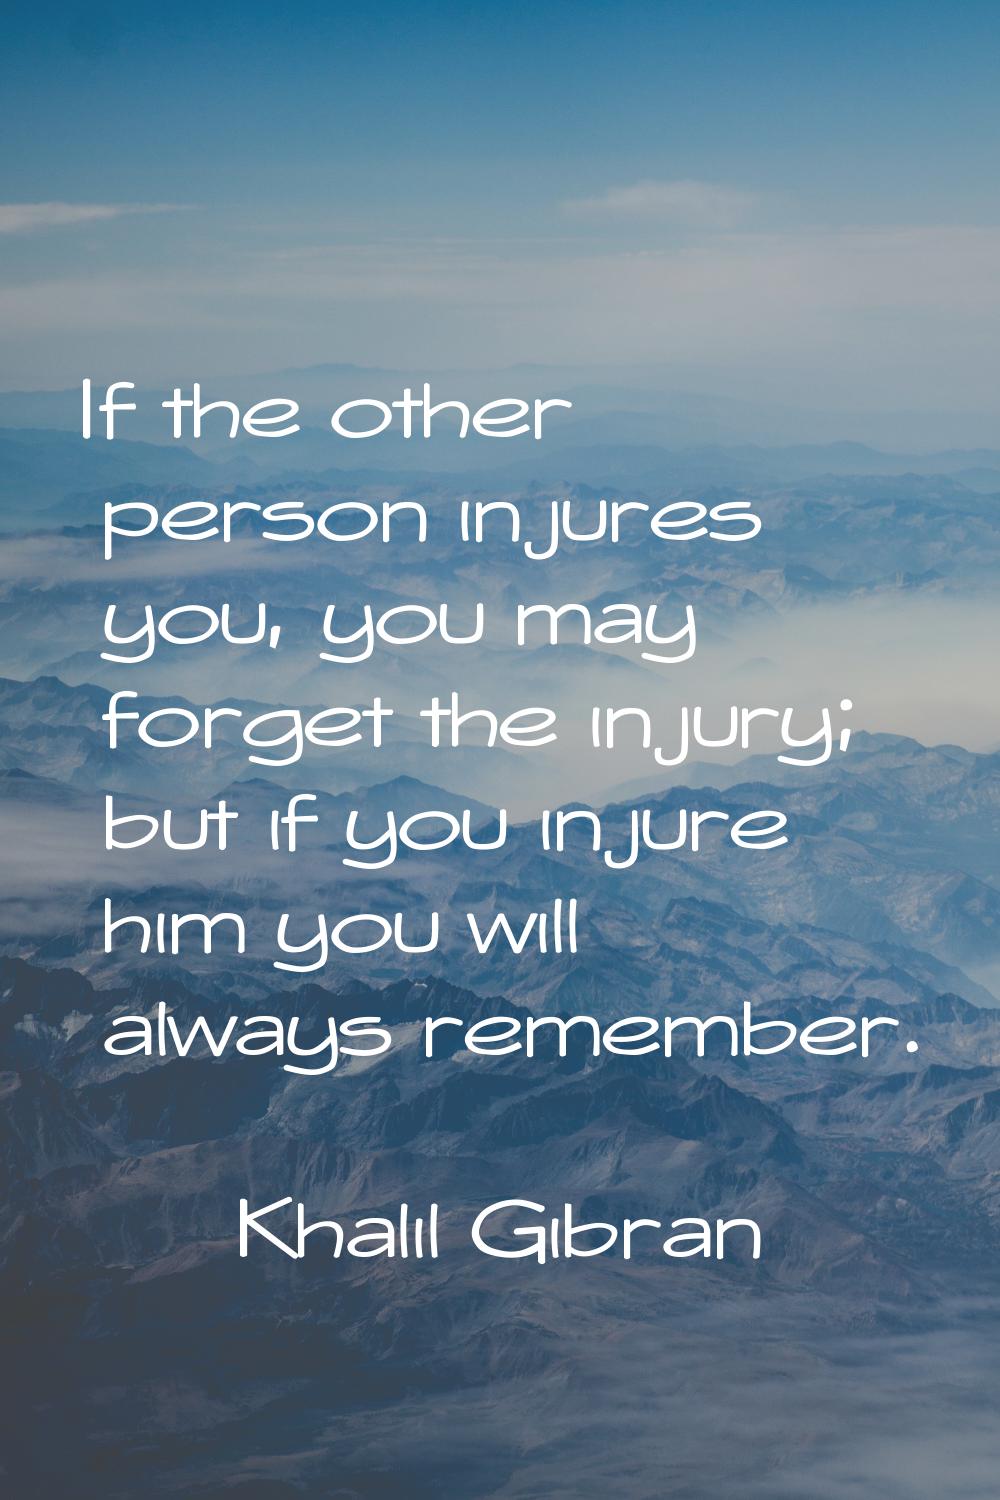 If the other person injures you, you may forget the injury; but if you injure him you will always r